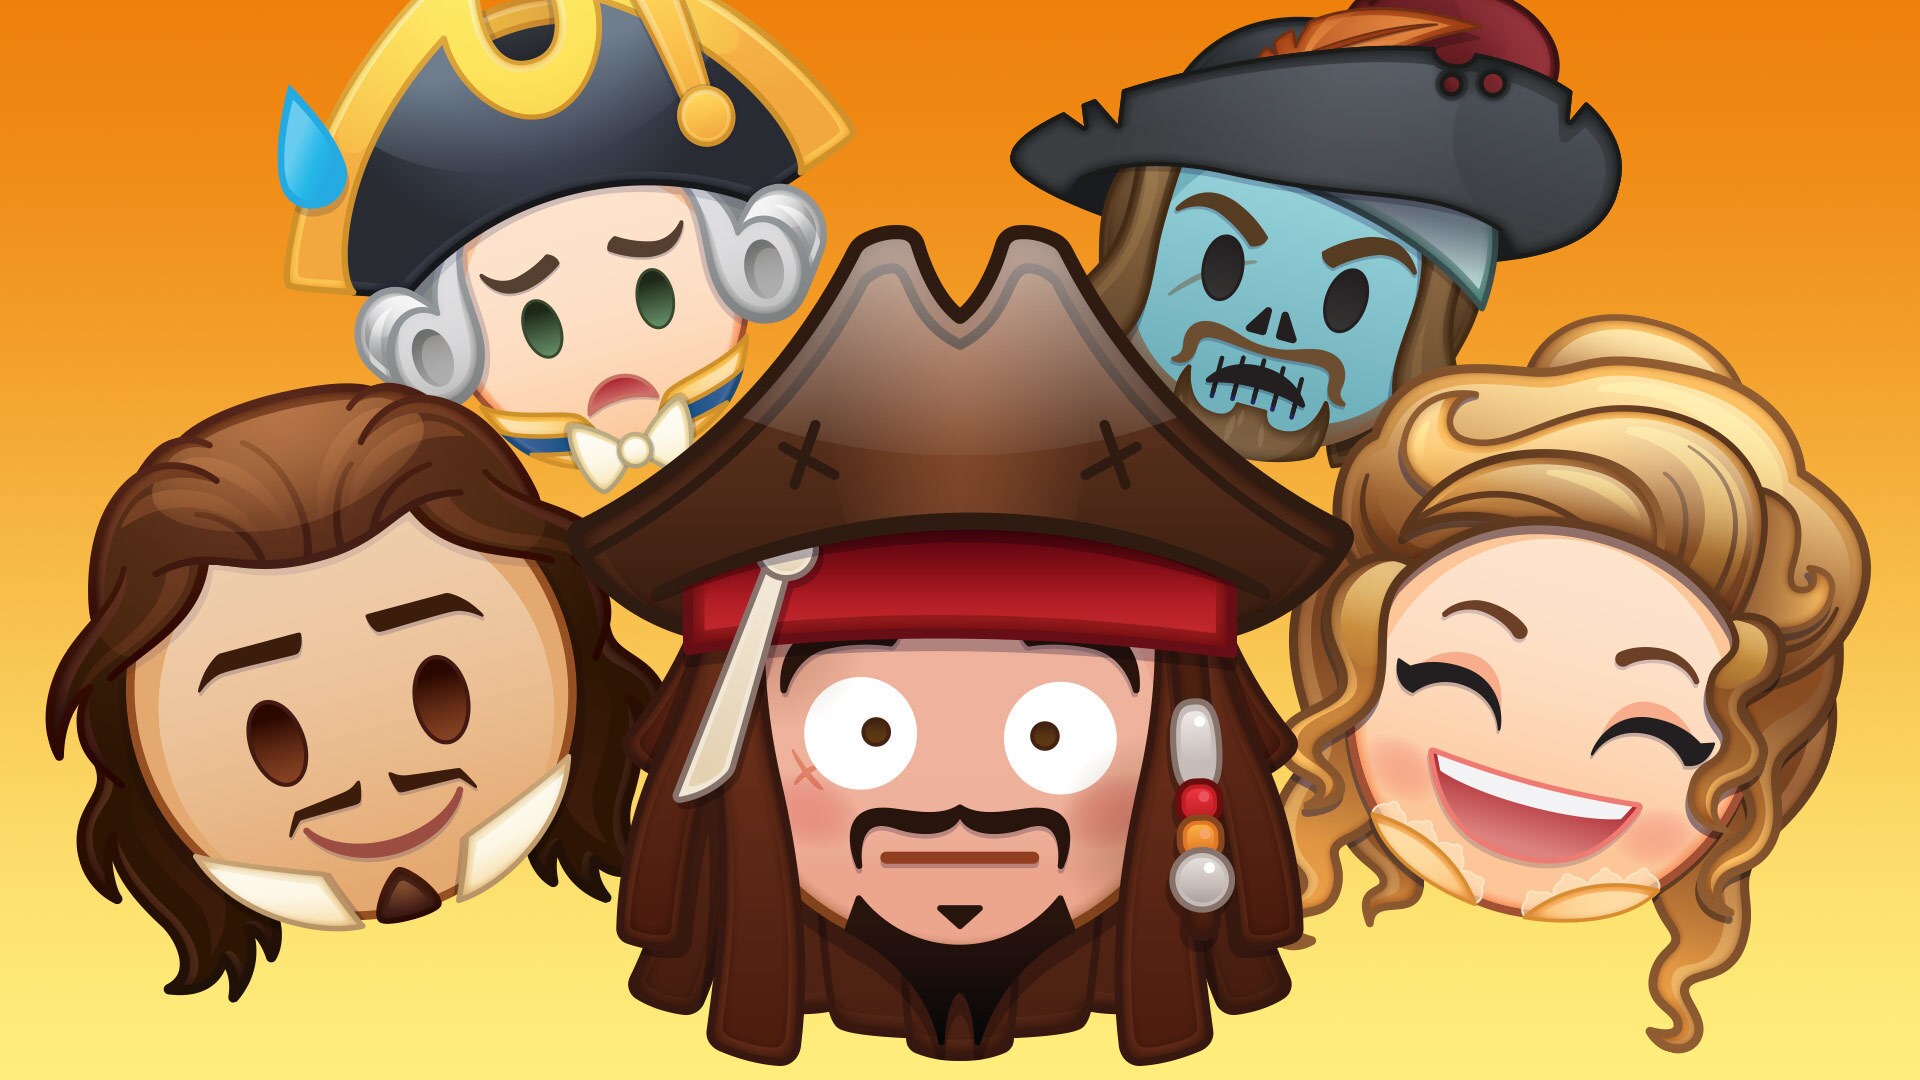 Pirates of the Caribbean as Told by Emoji | Disney  